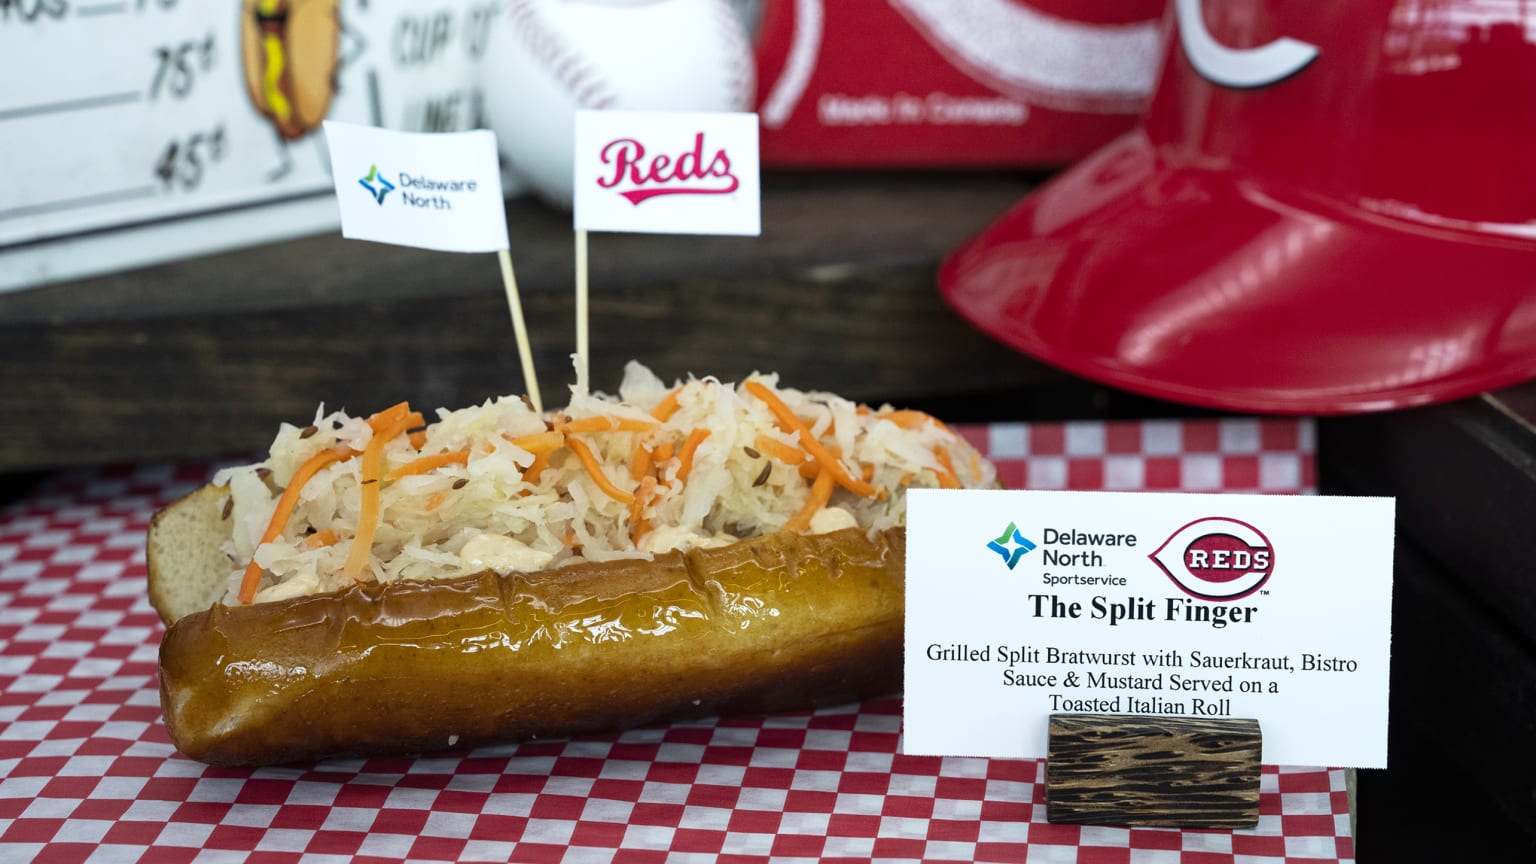 Where to Eat at Great American Ballpark, Home of the Cincinnati Reds - Eater